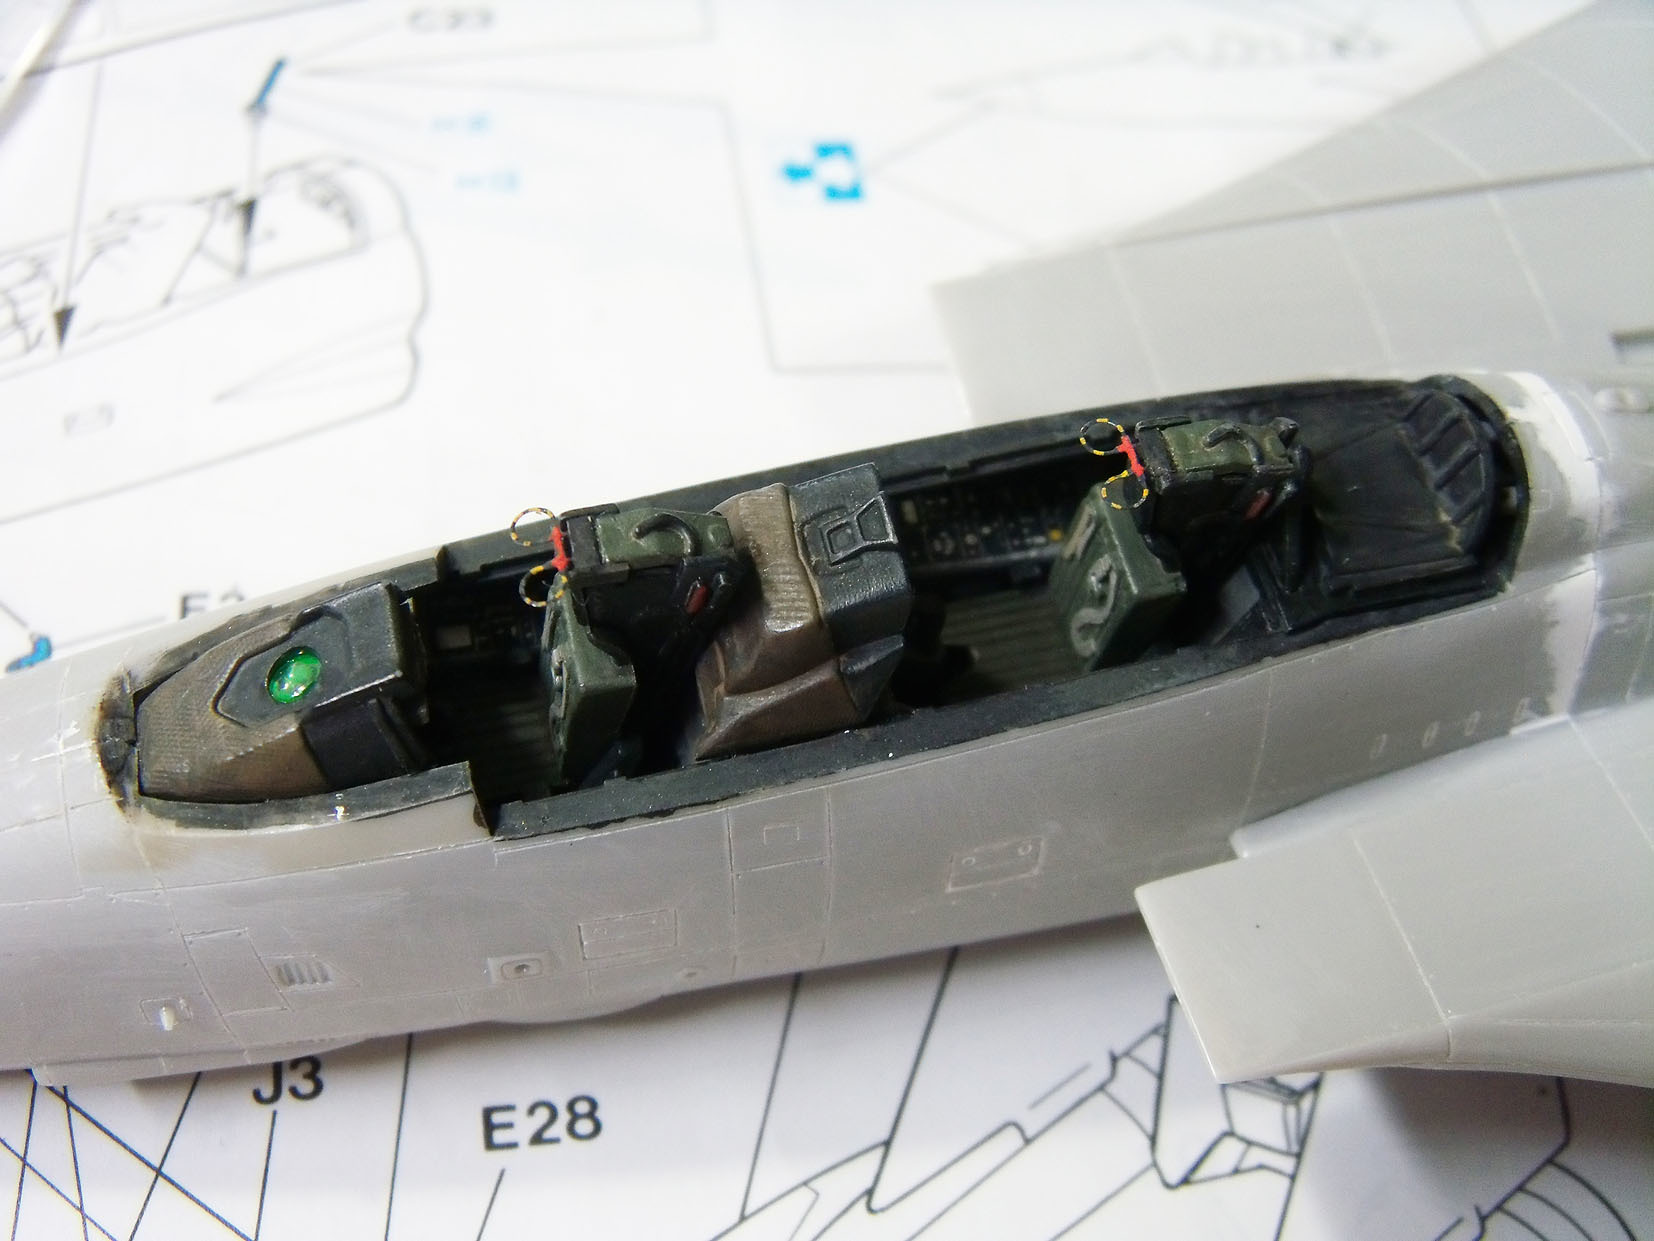 F-14A トムキャット（ハセガワ 1/72 新版）製作記 その8 - F-14A ハセガワ 1/72（新版）